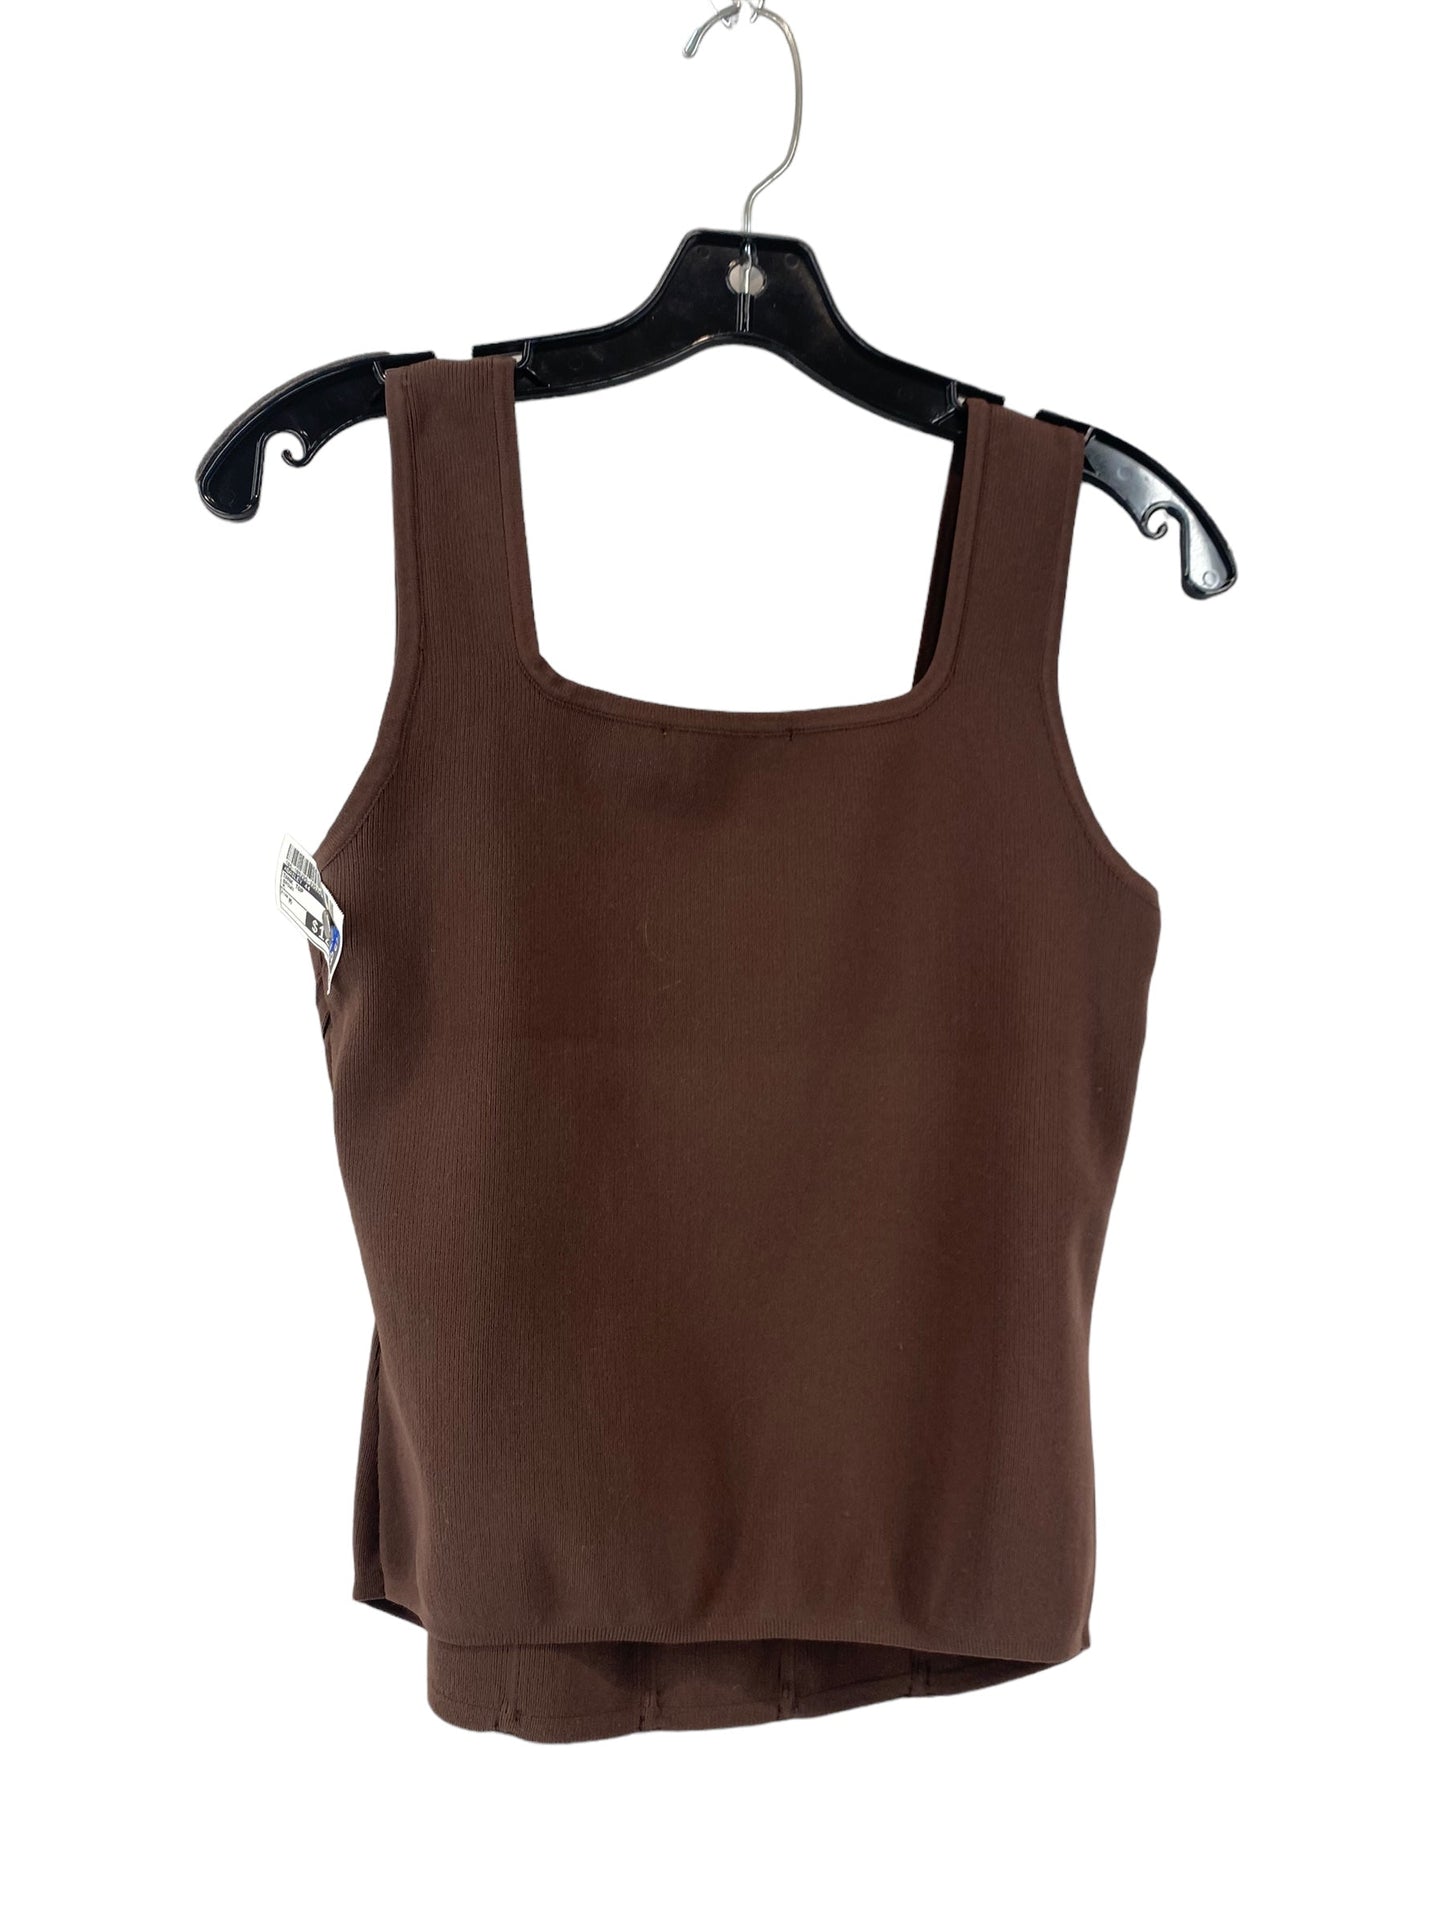 Brown Tank Top Bailey 44, Size M